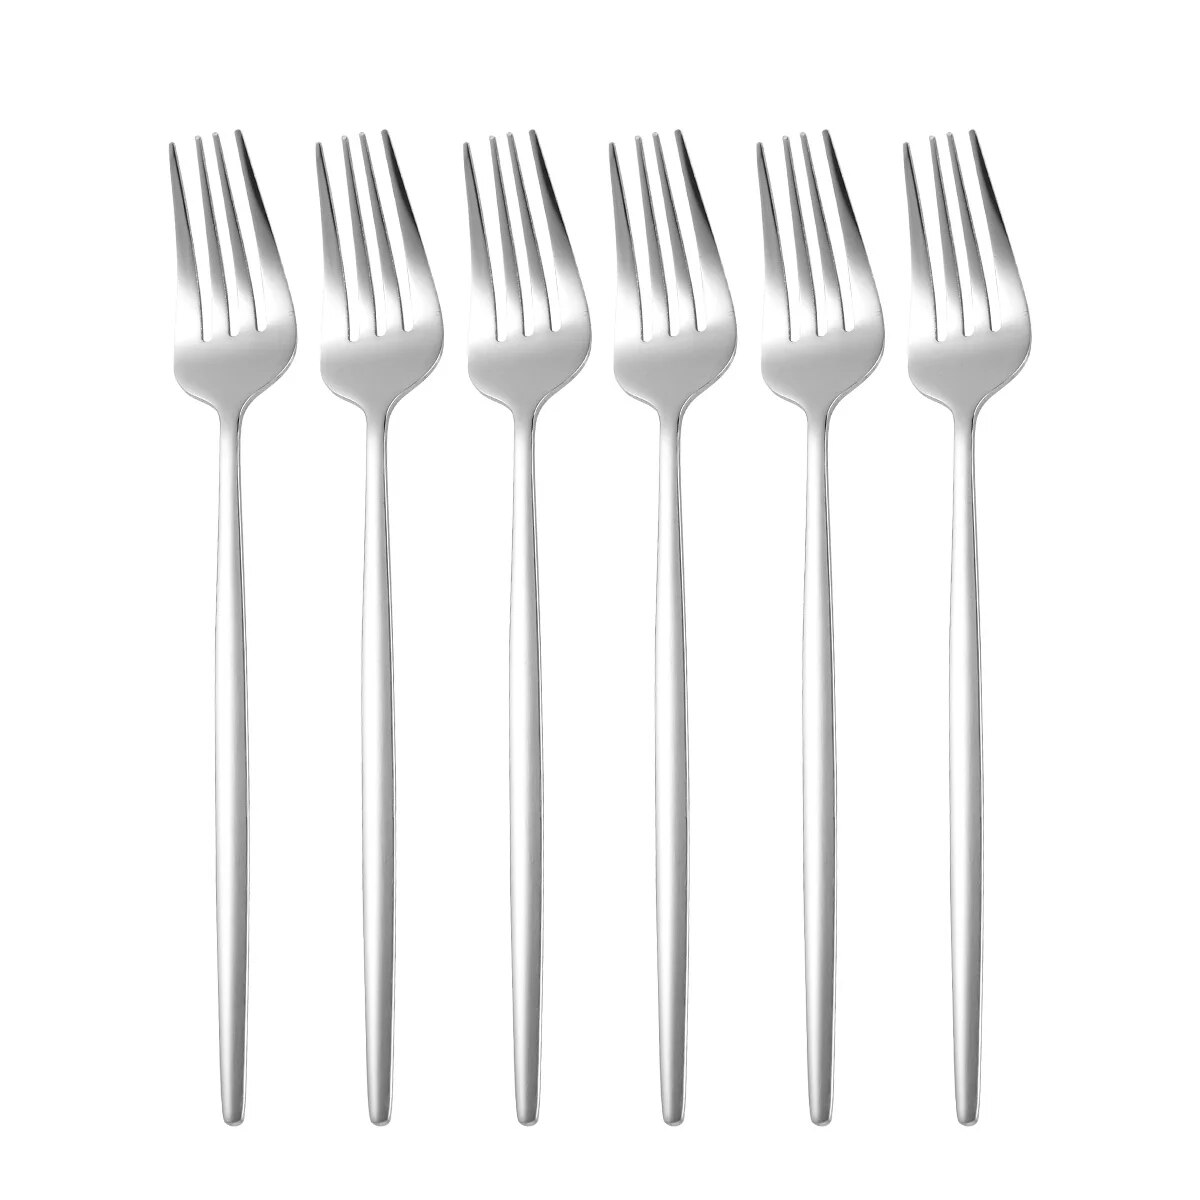 6pcs Set Of Golden Fork Cutlery Set Stainless Stee...